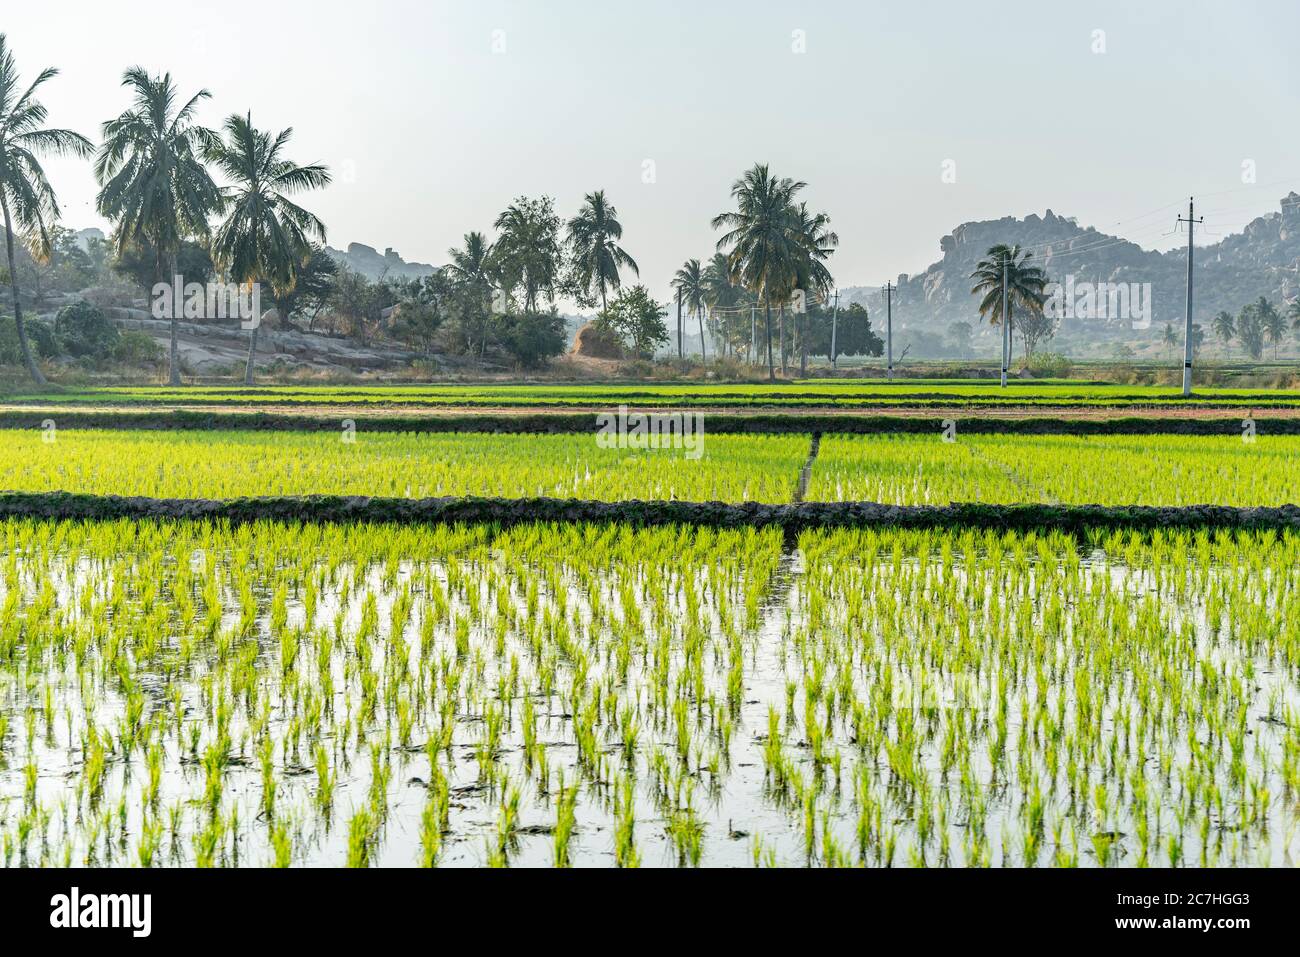 Paddy field with coconut palms in the background Stock Photo